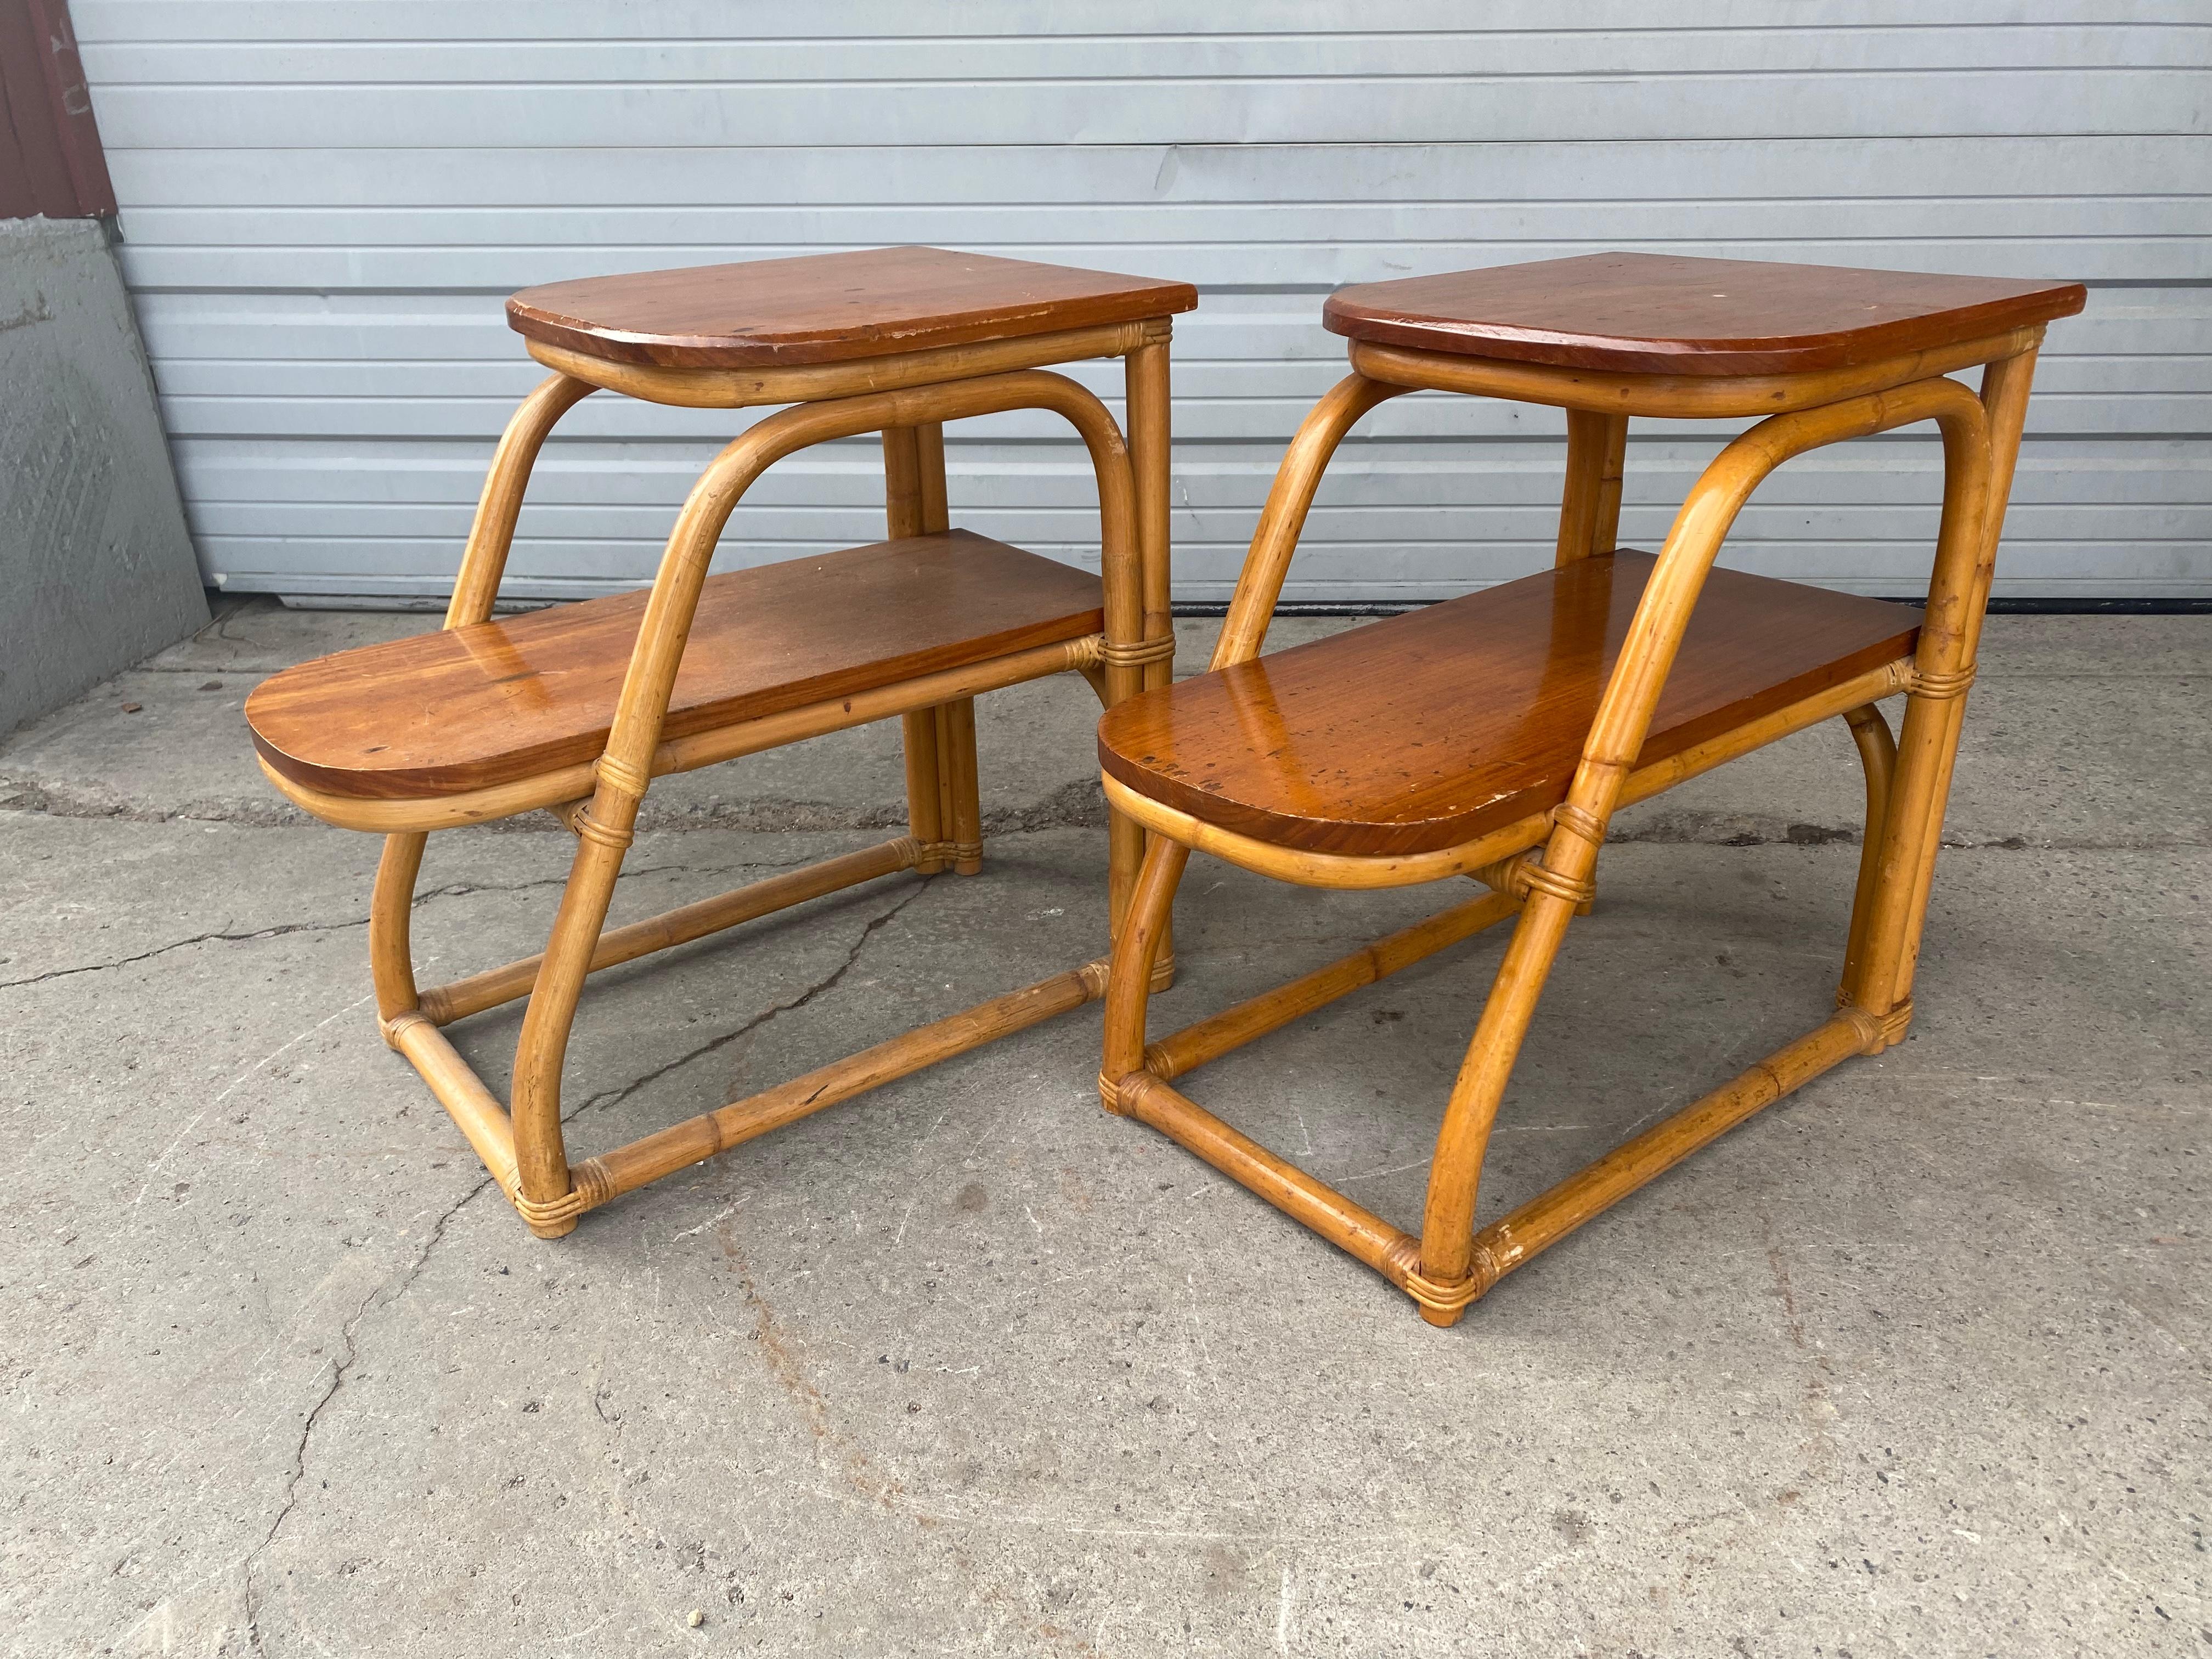 Pair Art Deco / Modernist bamboo step end tables by Rattan Art, Philippines, Amazing quality, Great design. Very reminiscent of the classic Bamboo designed by Paul Frankl.